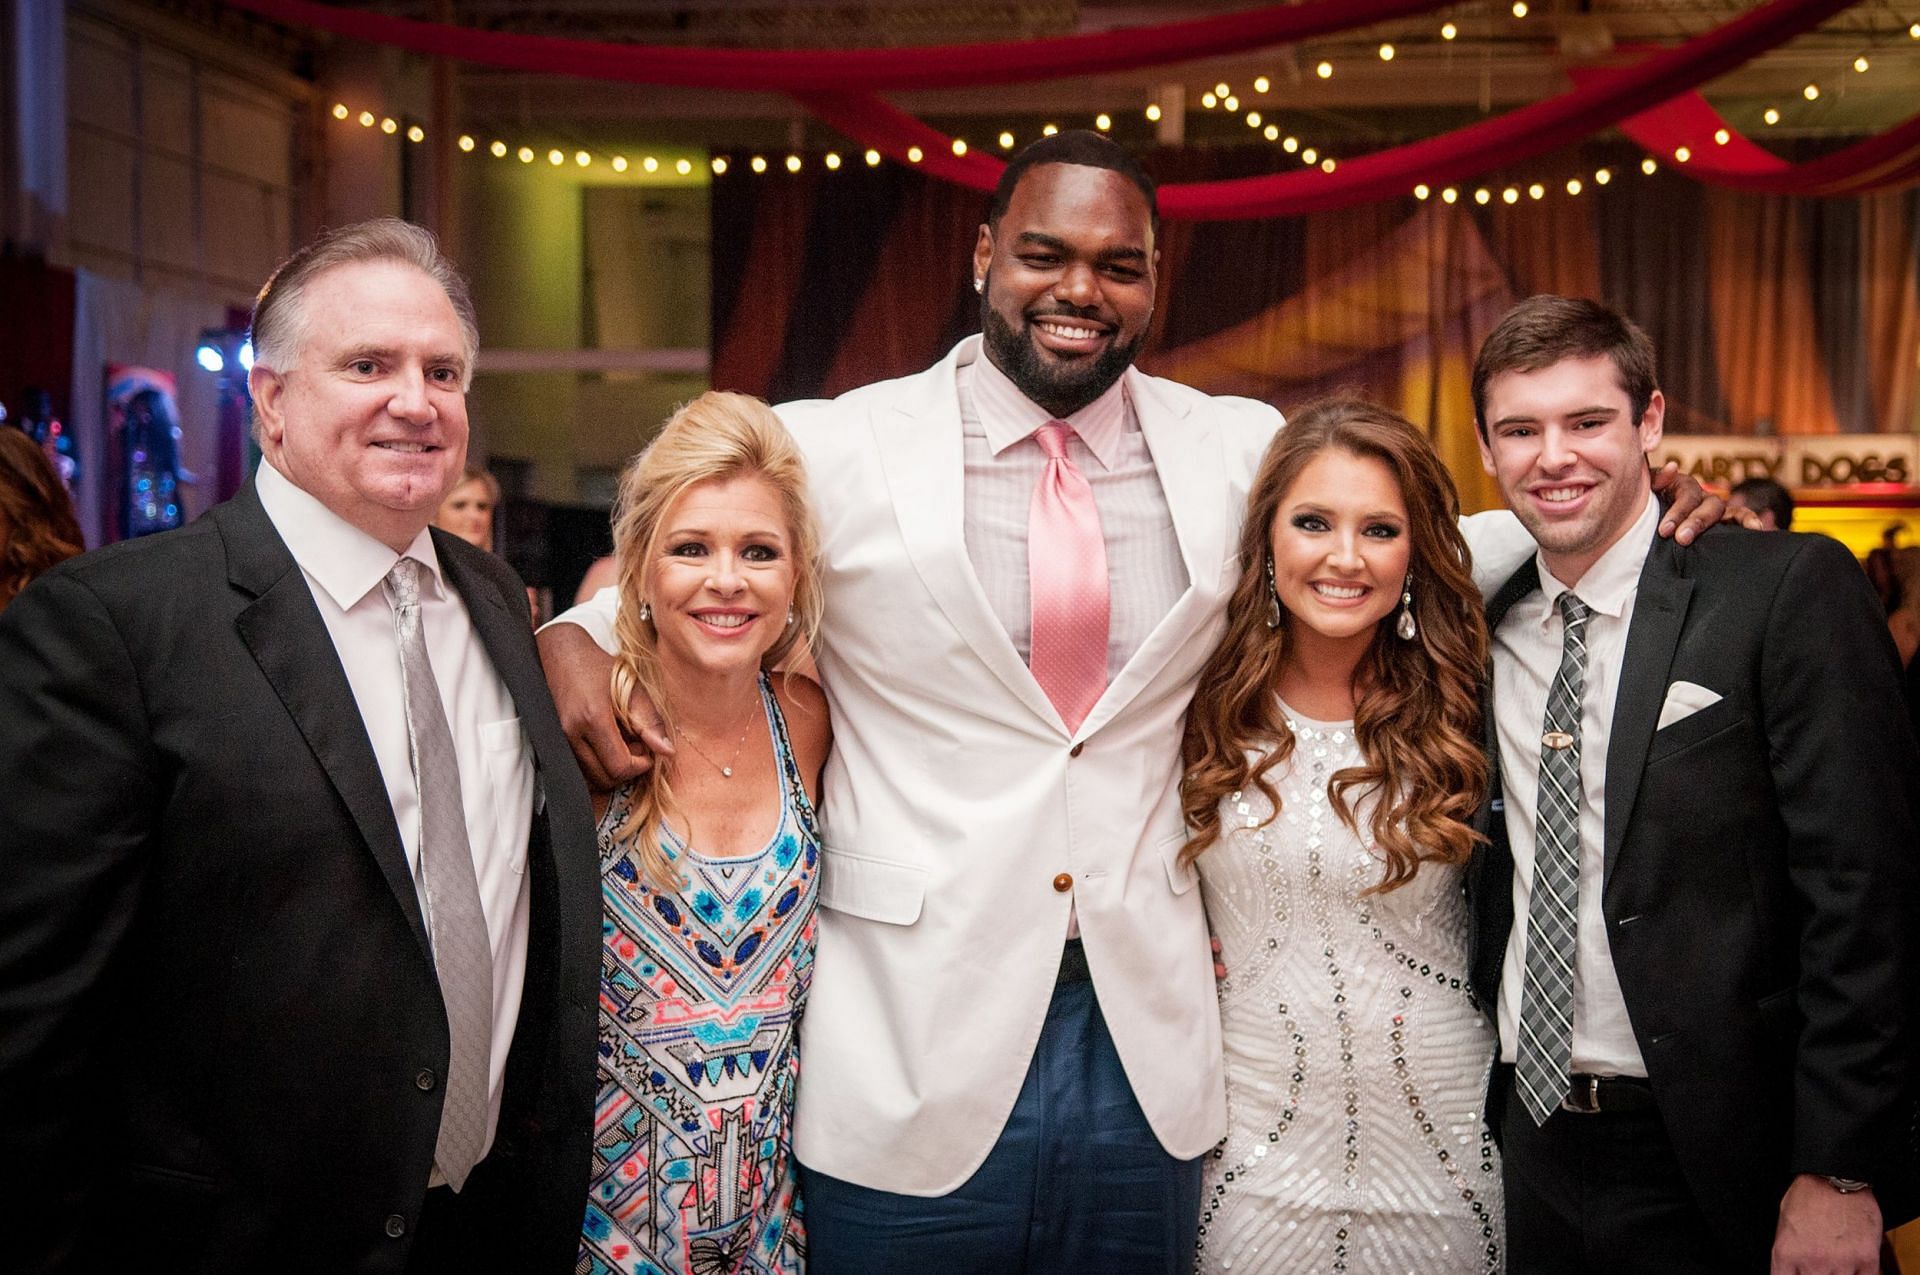 Michael Oher opens up on the movie The Blindside